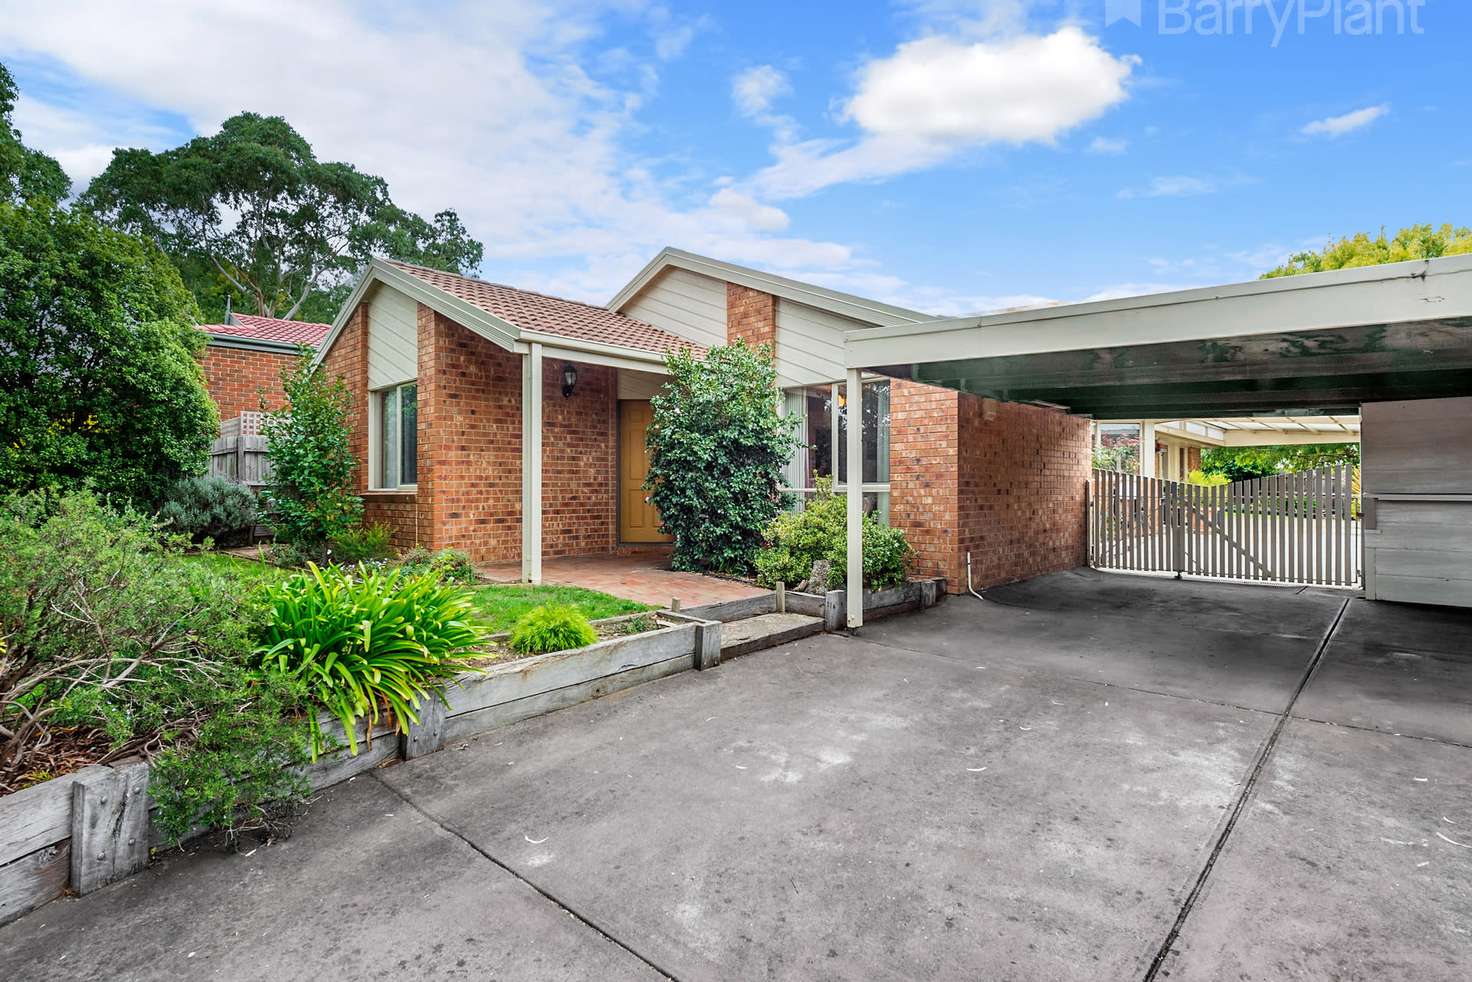 Main view of Homely house listing, 28 Fairlawn Place, Bayswater VIC 3153